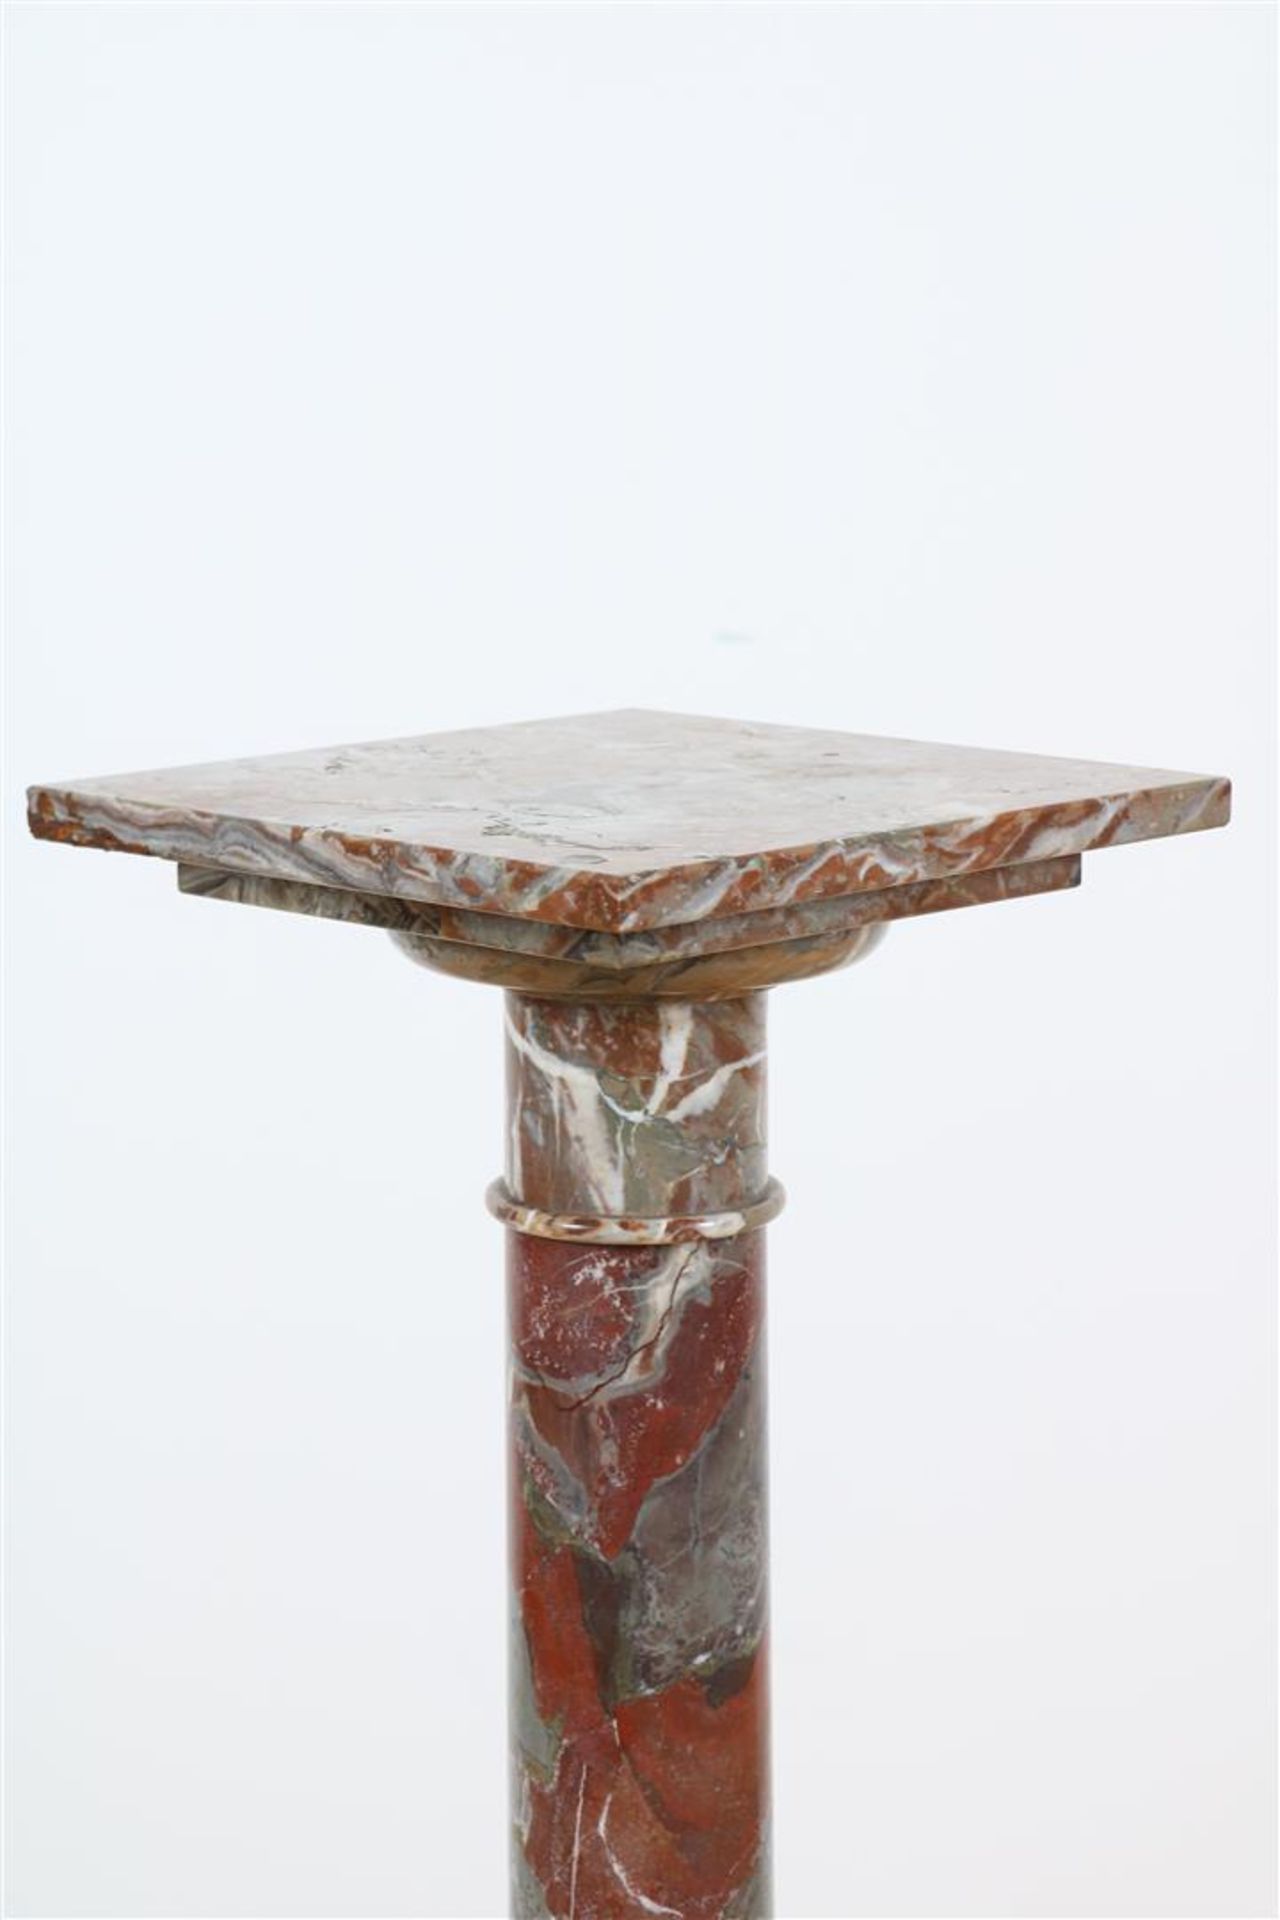 Red marble veined pedestals, with removable top, late 19th century, height 108 cm. - Image 5 of 5